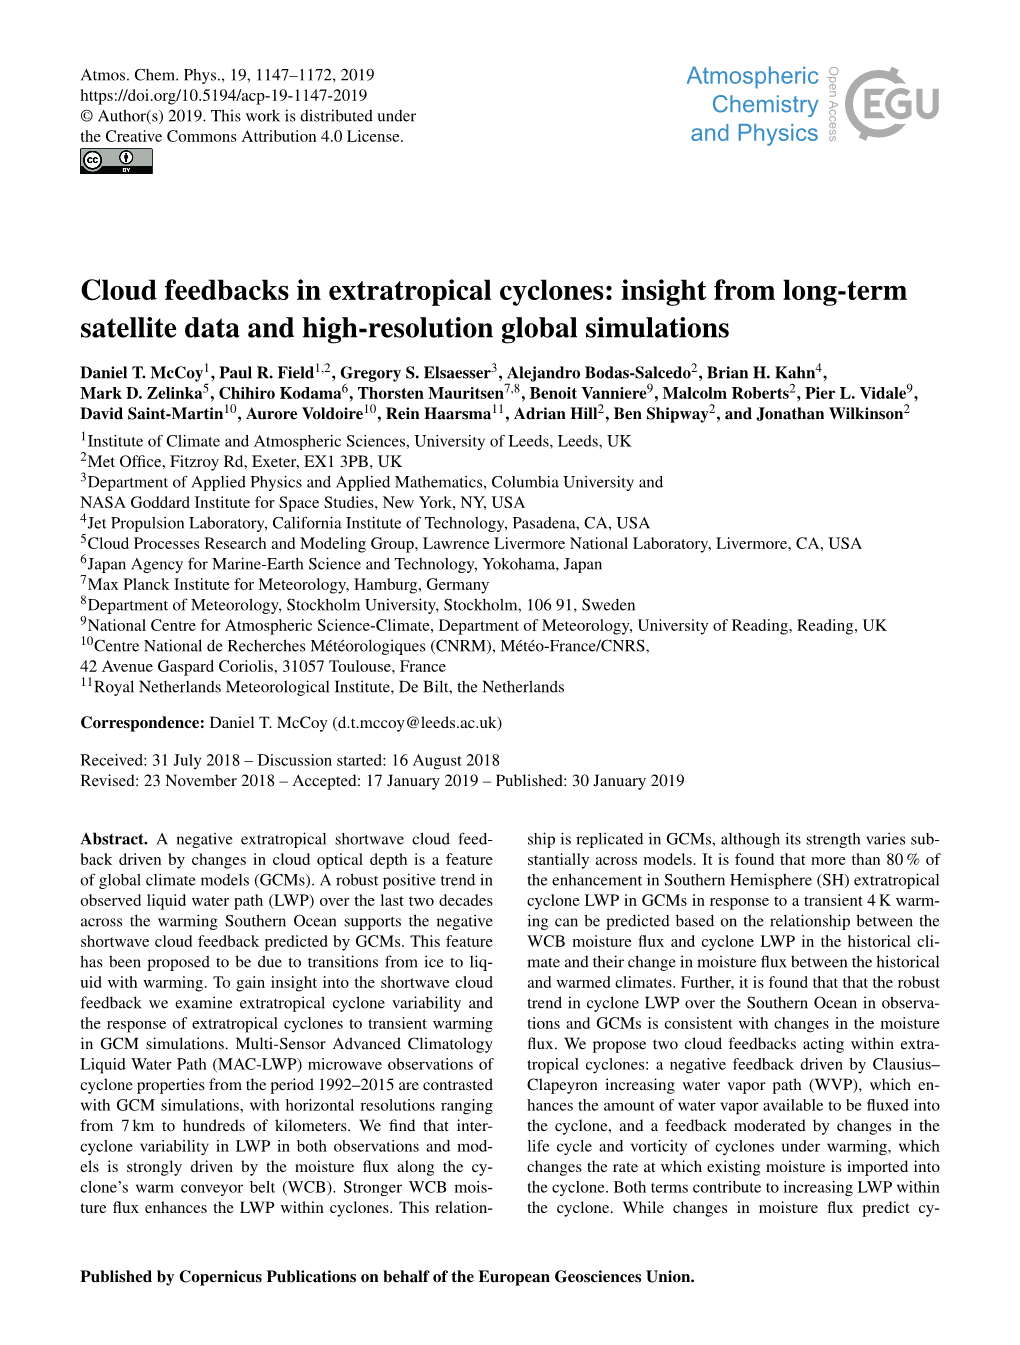 Cloud Feedbacks in Extratropical Cyclones: Insight from Long-Term Satellite Data and High-Resolution Global Simulations